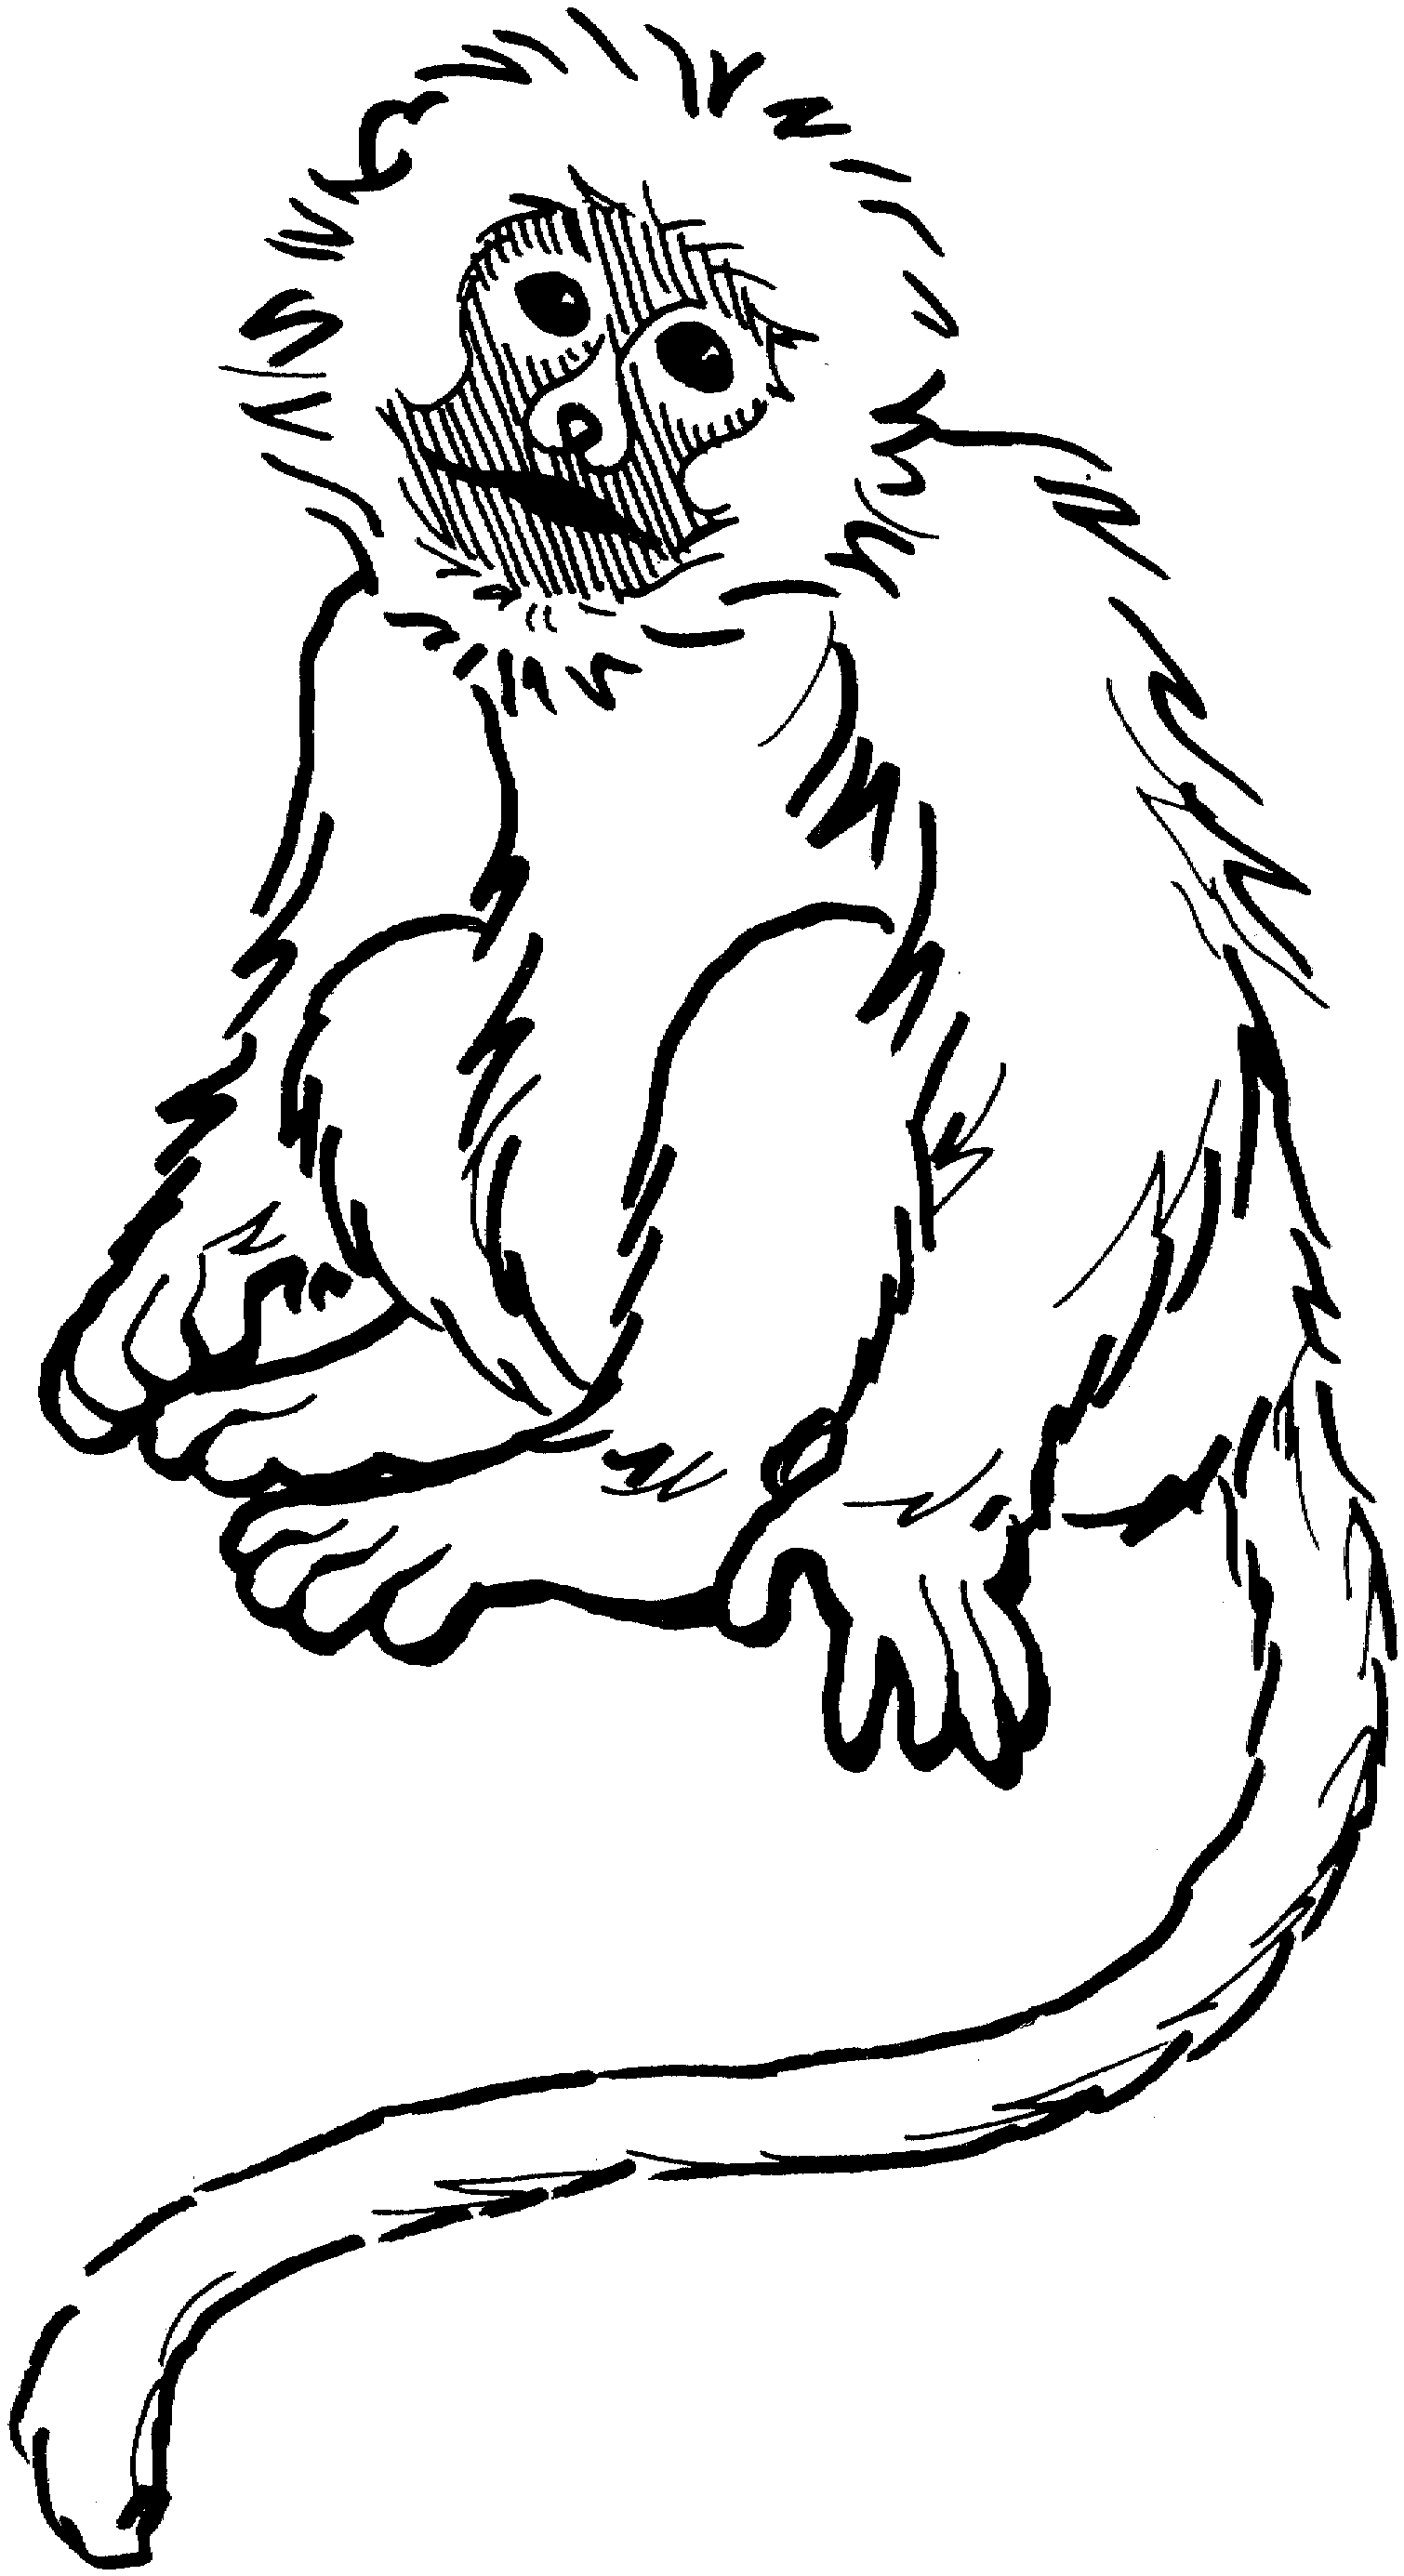 Monkey  black and white black and white pictures of monkeys clipart 2